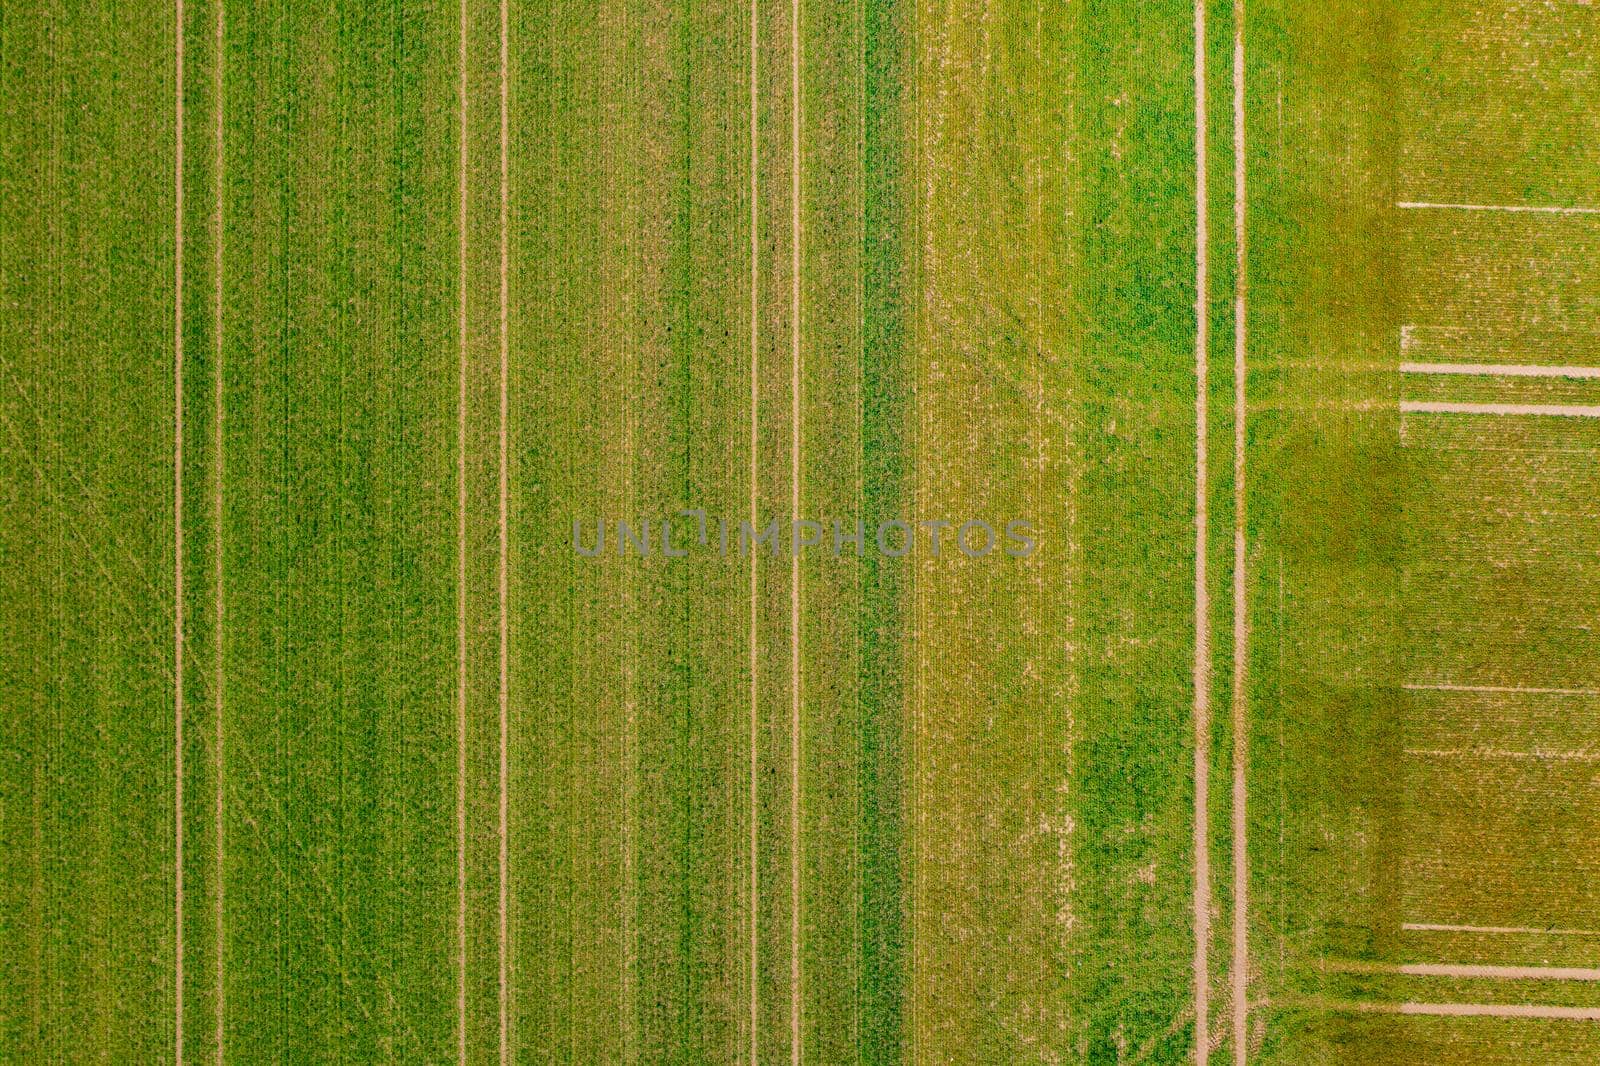 Lines of tractor tracks in a green field in spring from a direct overhead drone perspective